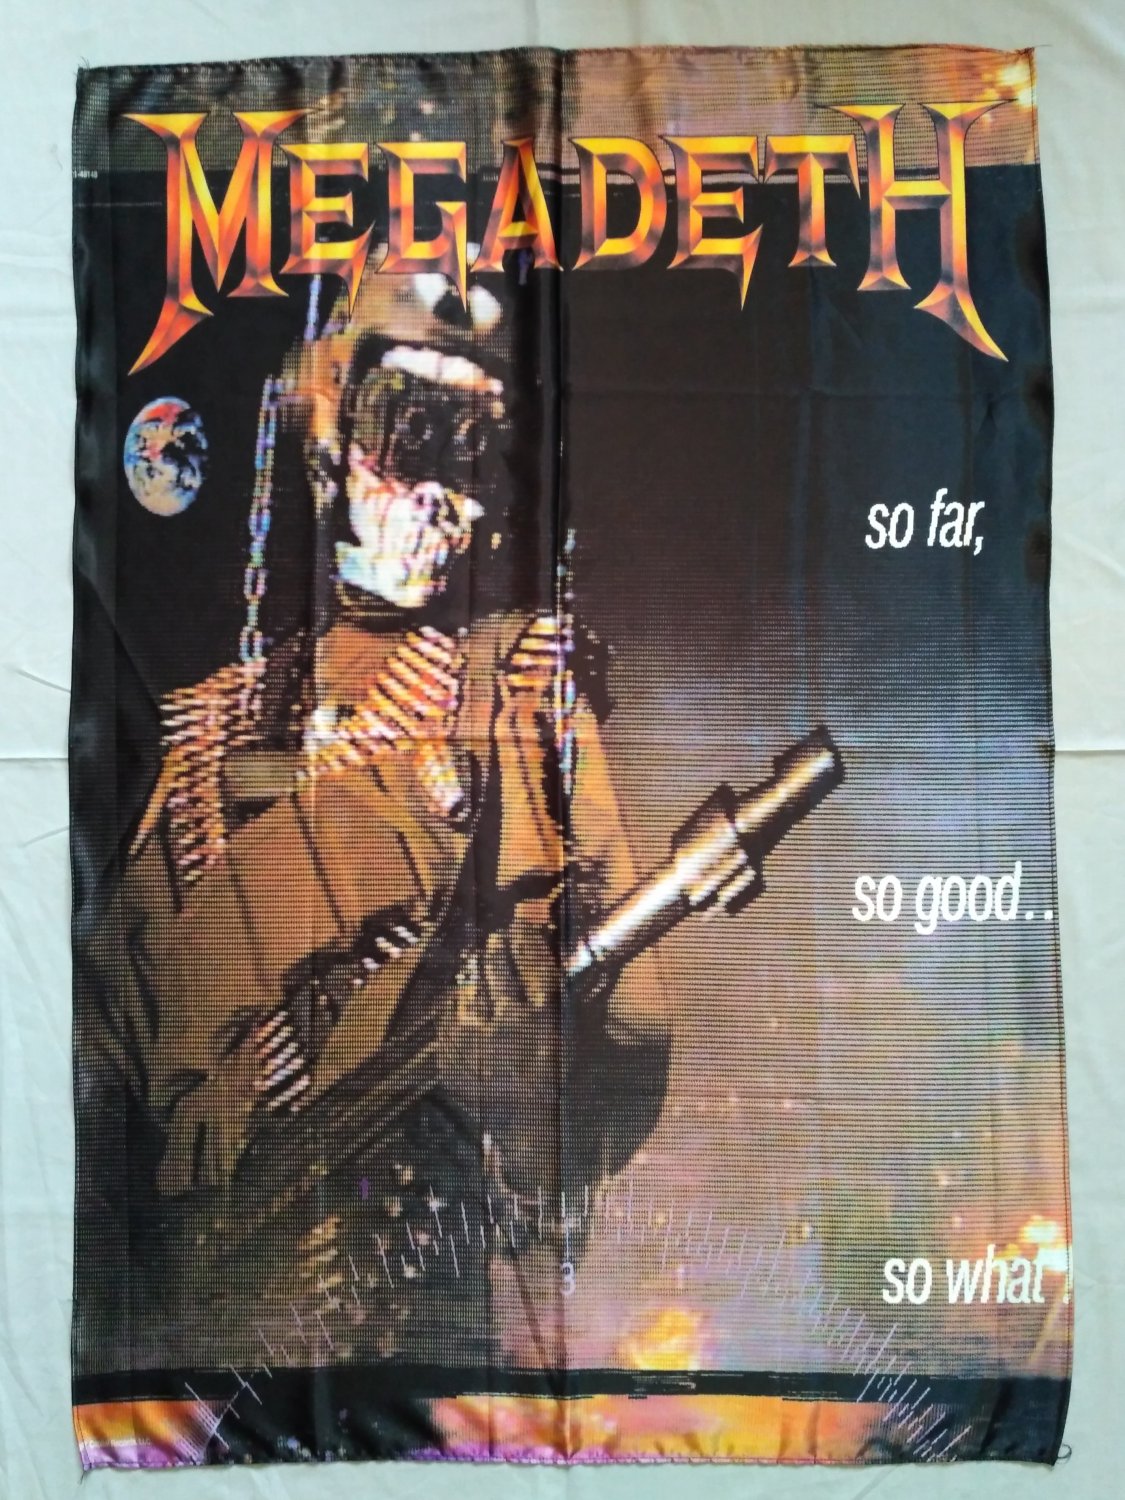 MEGADETH - So far so good so what FLAG Thrash Metal cloth poster Dave Mustaine Speed Metal